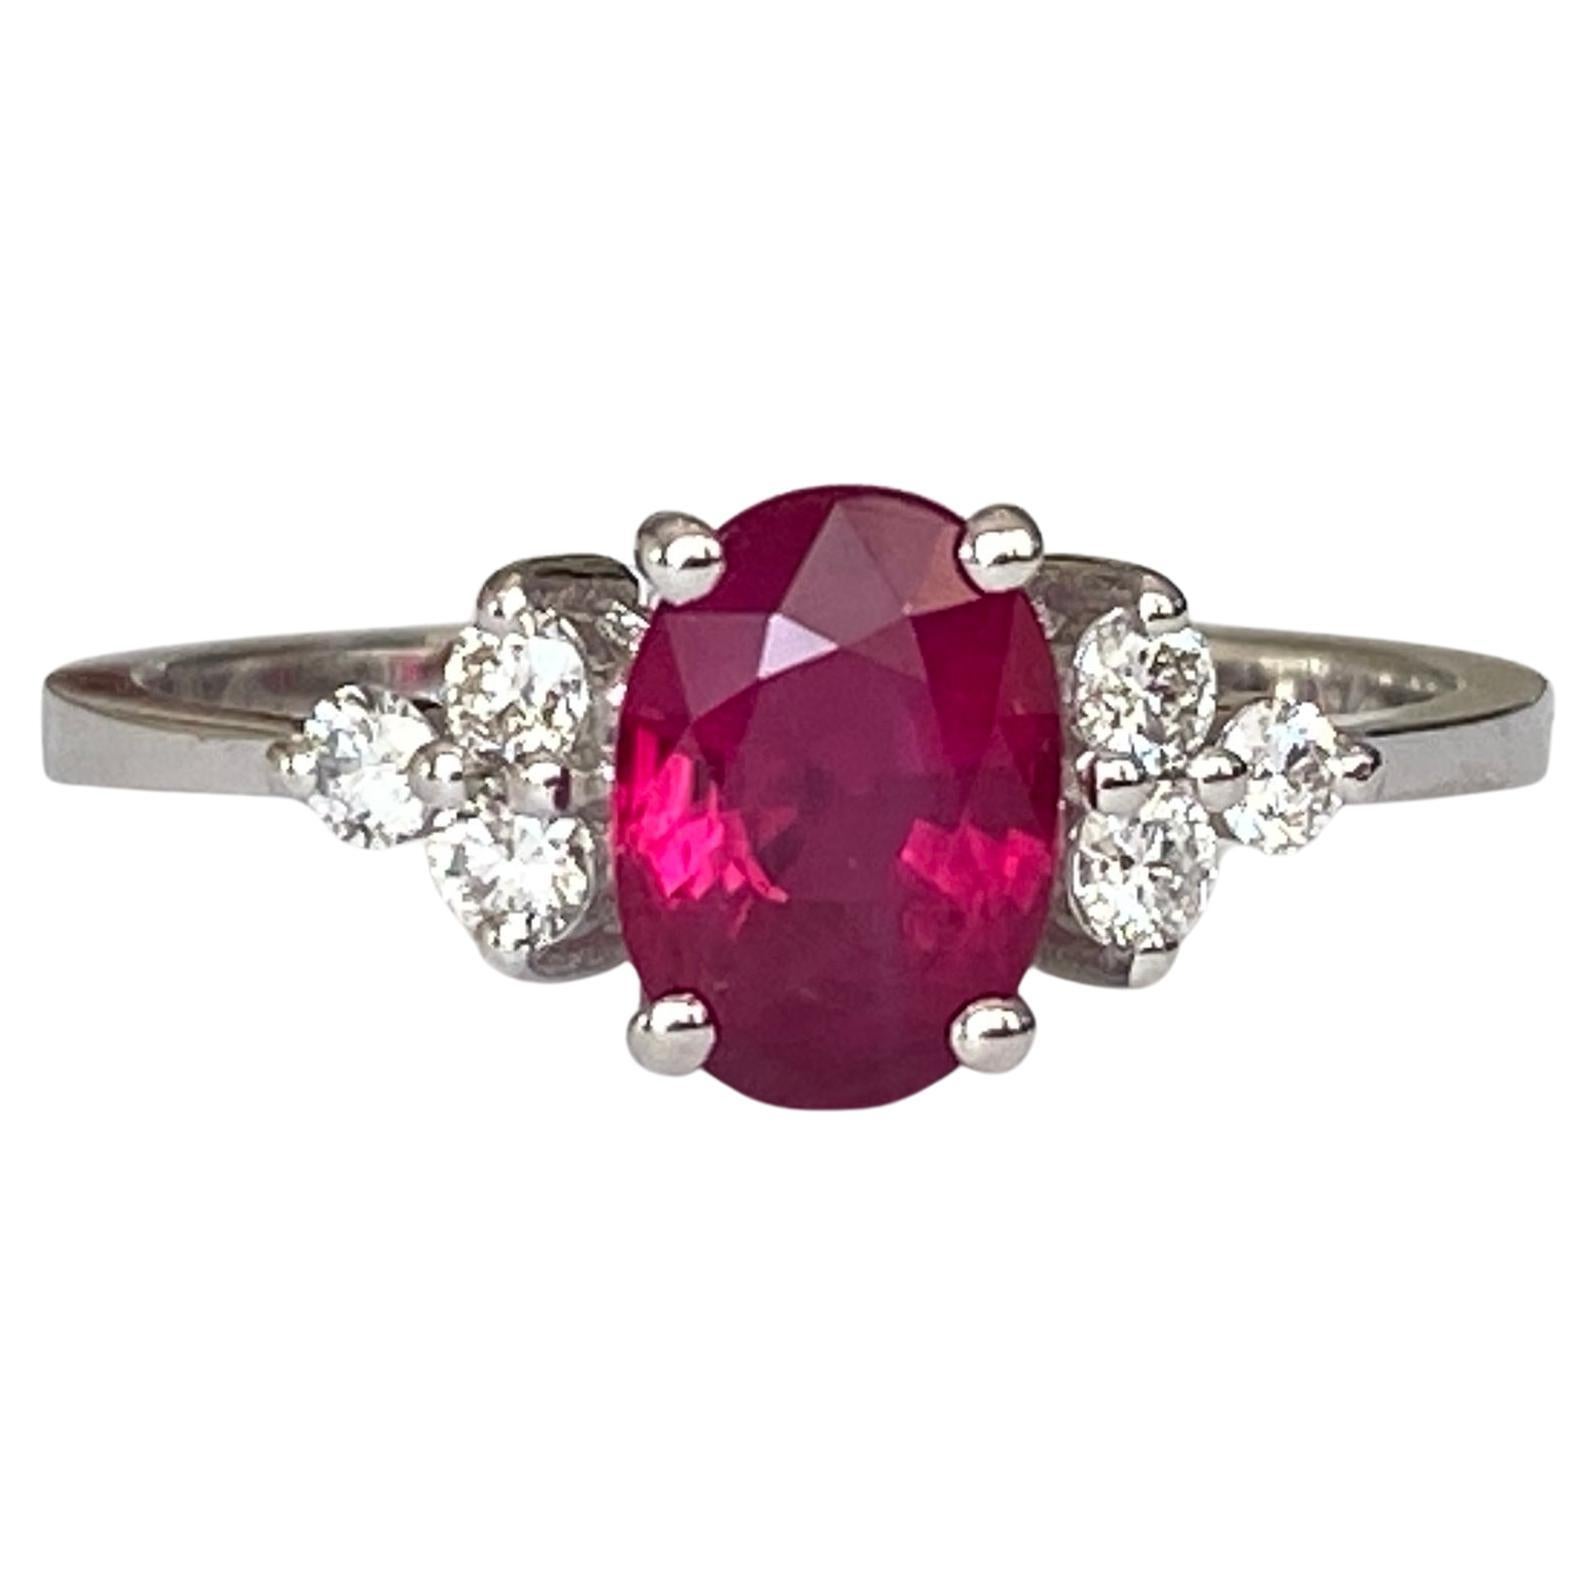 Algt Certified 18 Kt.White Gold Ring with 1.23 Ct Ruby, Diamonds